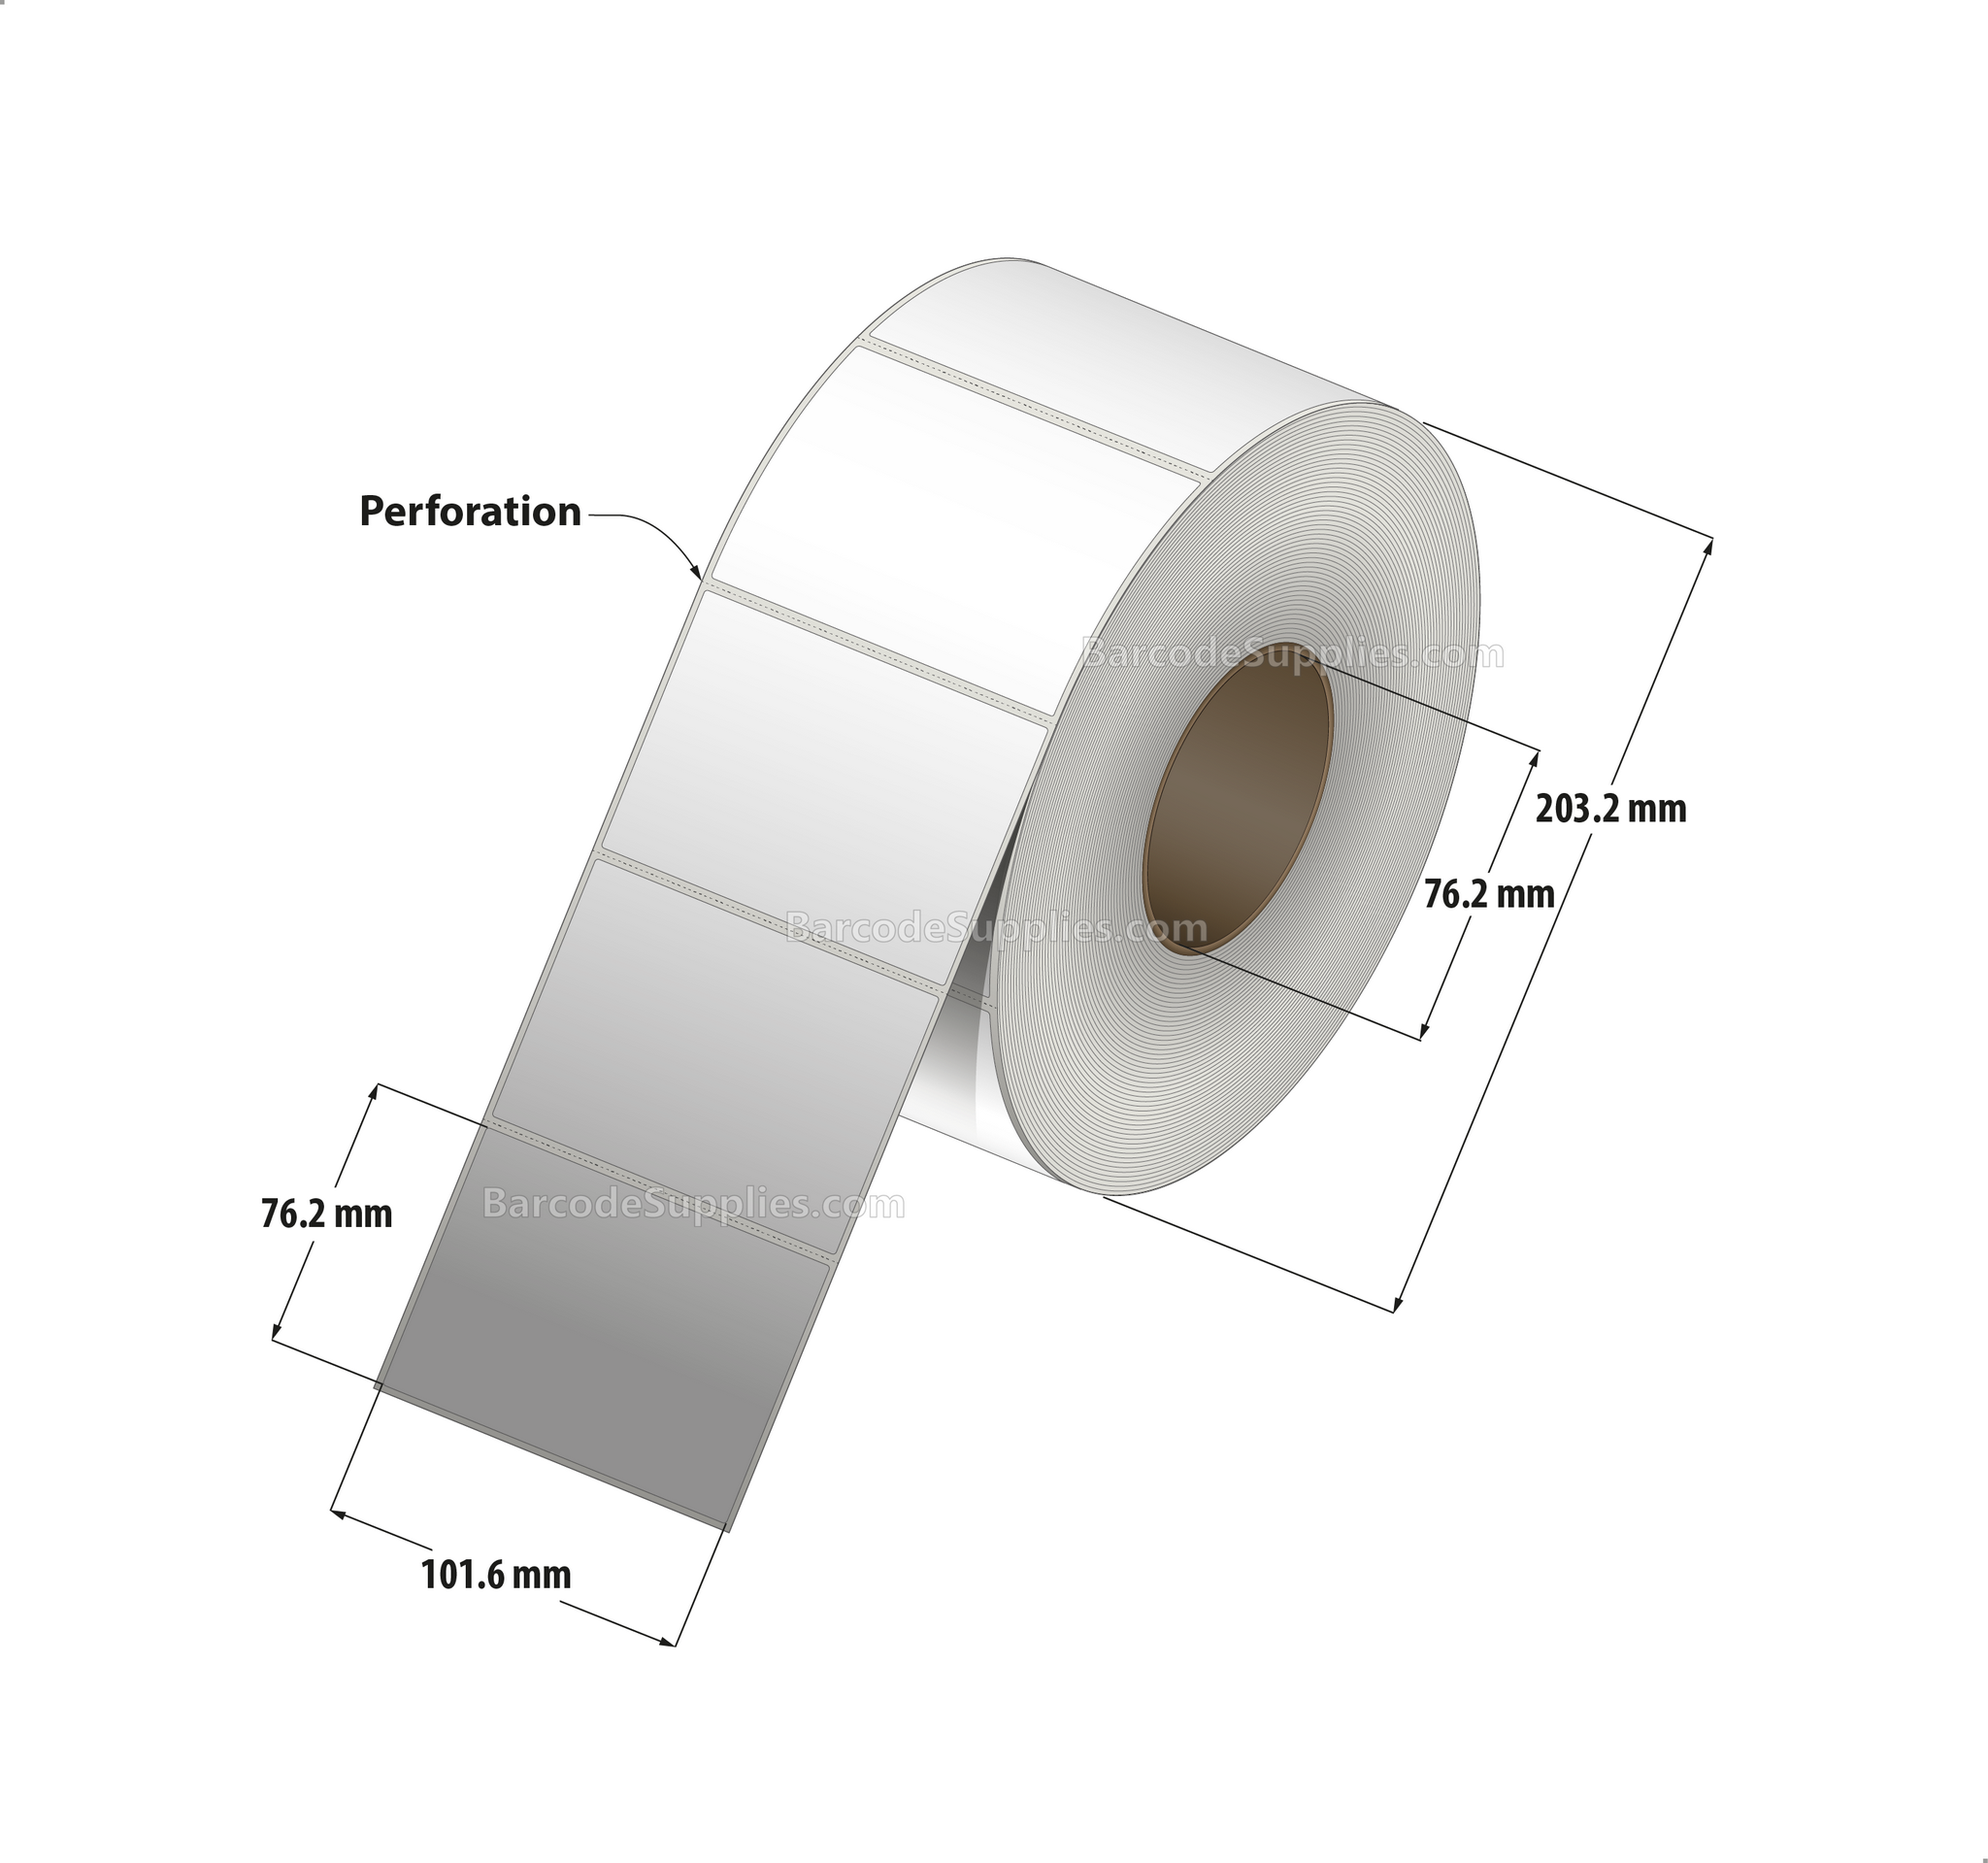 4 x 3 Thermal Transfer White Labels With Removable Adhesive - Perforated - 1900 Labels Per Roll - Carton Of 4 Rolls - 7600 Labels Total - MPN: RE-4-3-1900-3